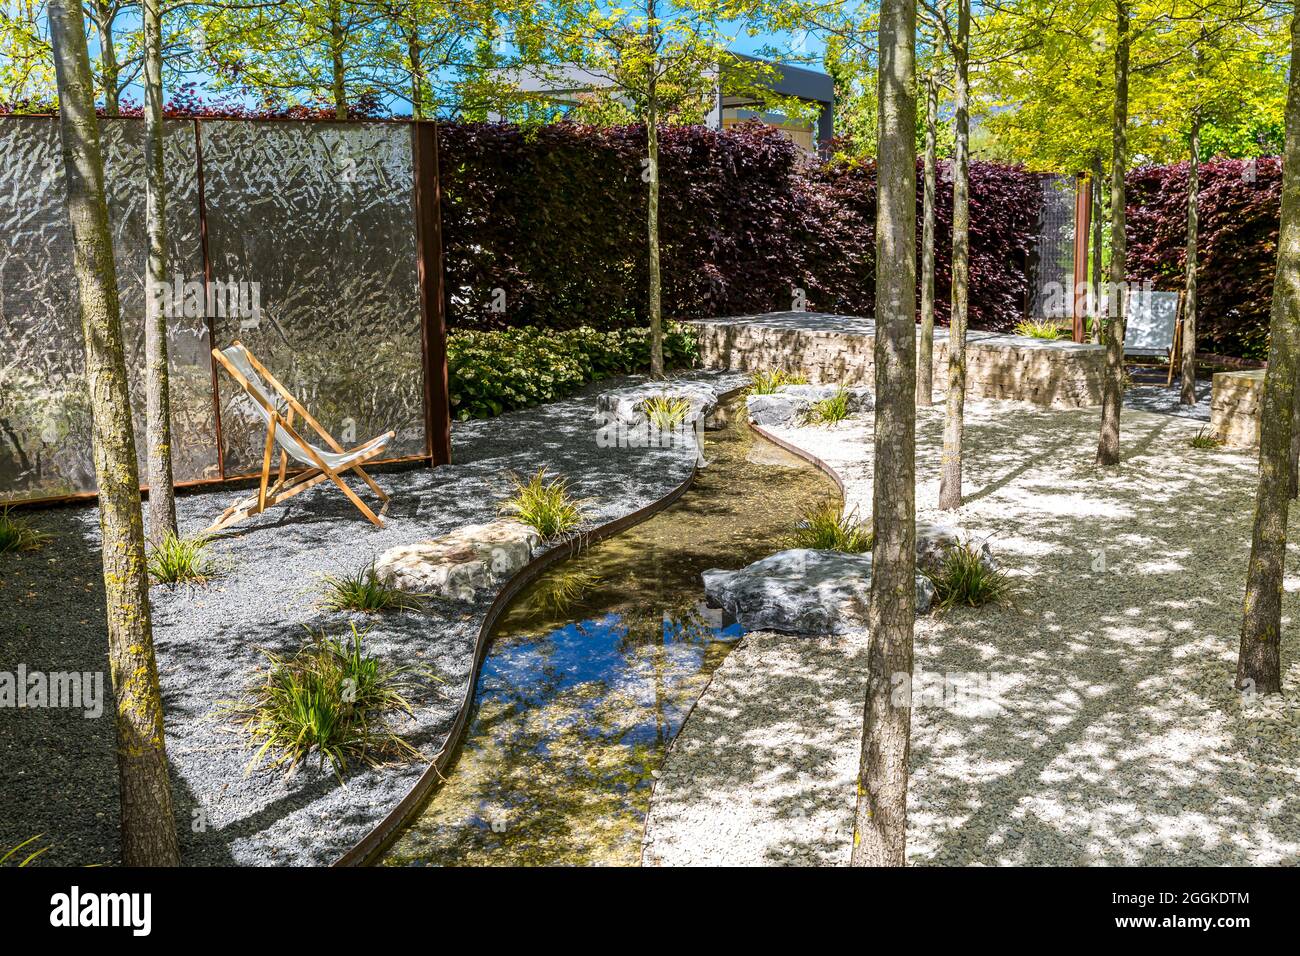 Refuge corner with a small stream, Inspiration Nature, State Garden Show, Ingolstadt 2020, new term 2021, Ingolstadt, Bavaria, Germany, Europe Stock Photo